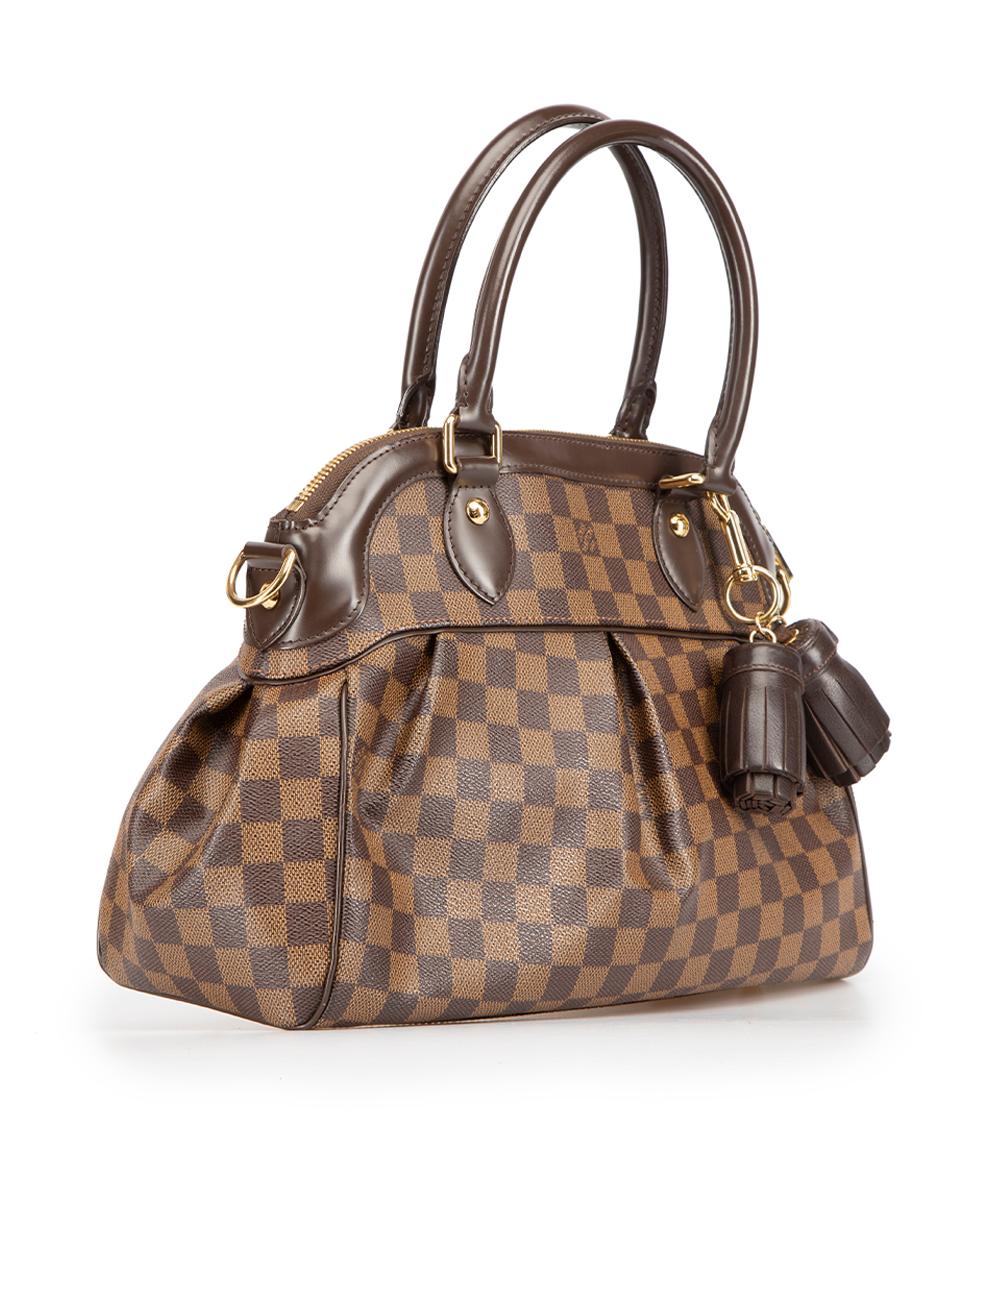 CONDITION is Very good. Minimal wear to bag is evident. Minimal wear to the rear-left base corner and shoulder strap with small scuffs to the front top leather trim with faint scratch on this used Louis Vuitton designer resale item. This item comes